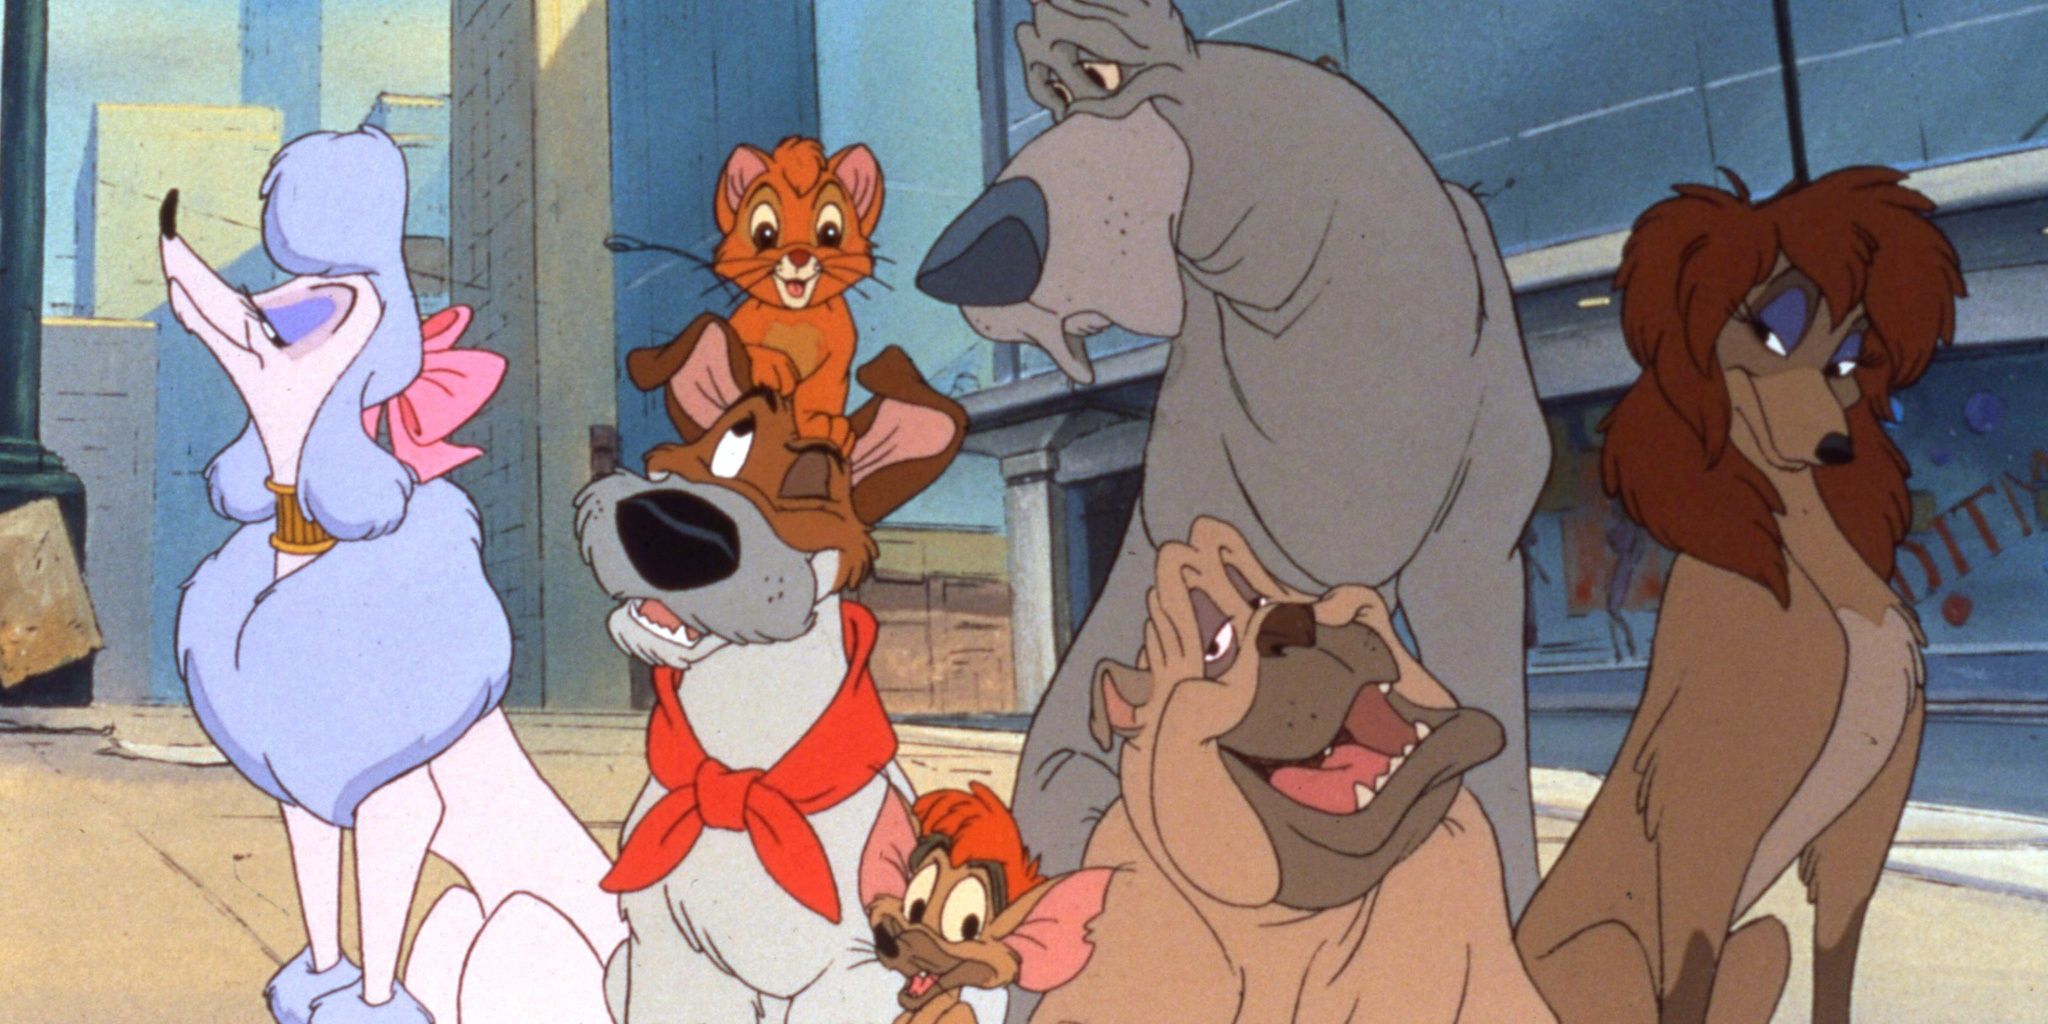 Oliver sitting with the dogs in Oliver & Company